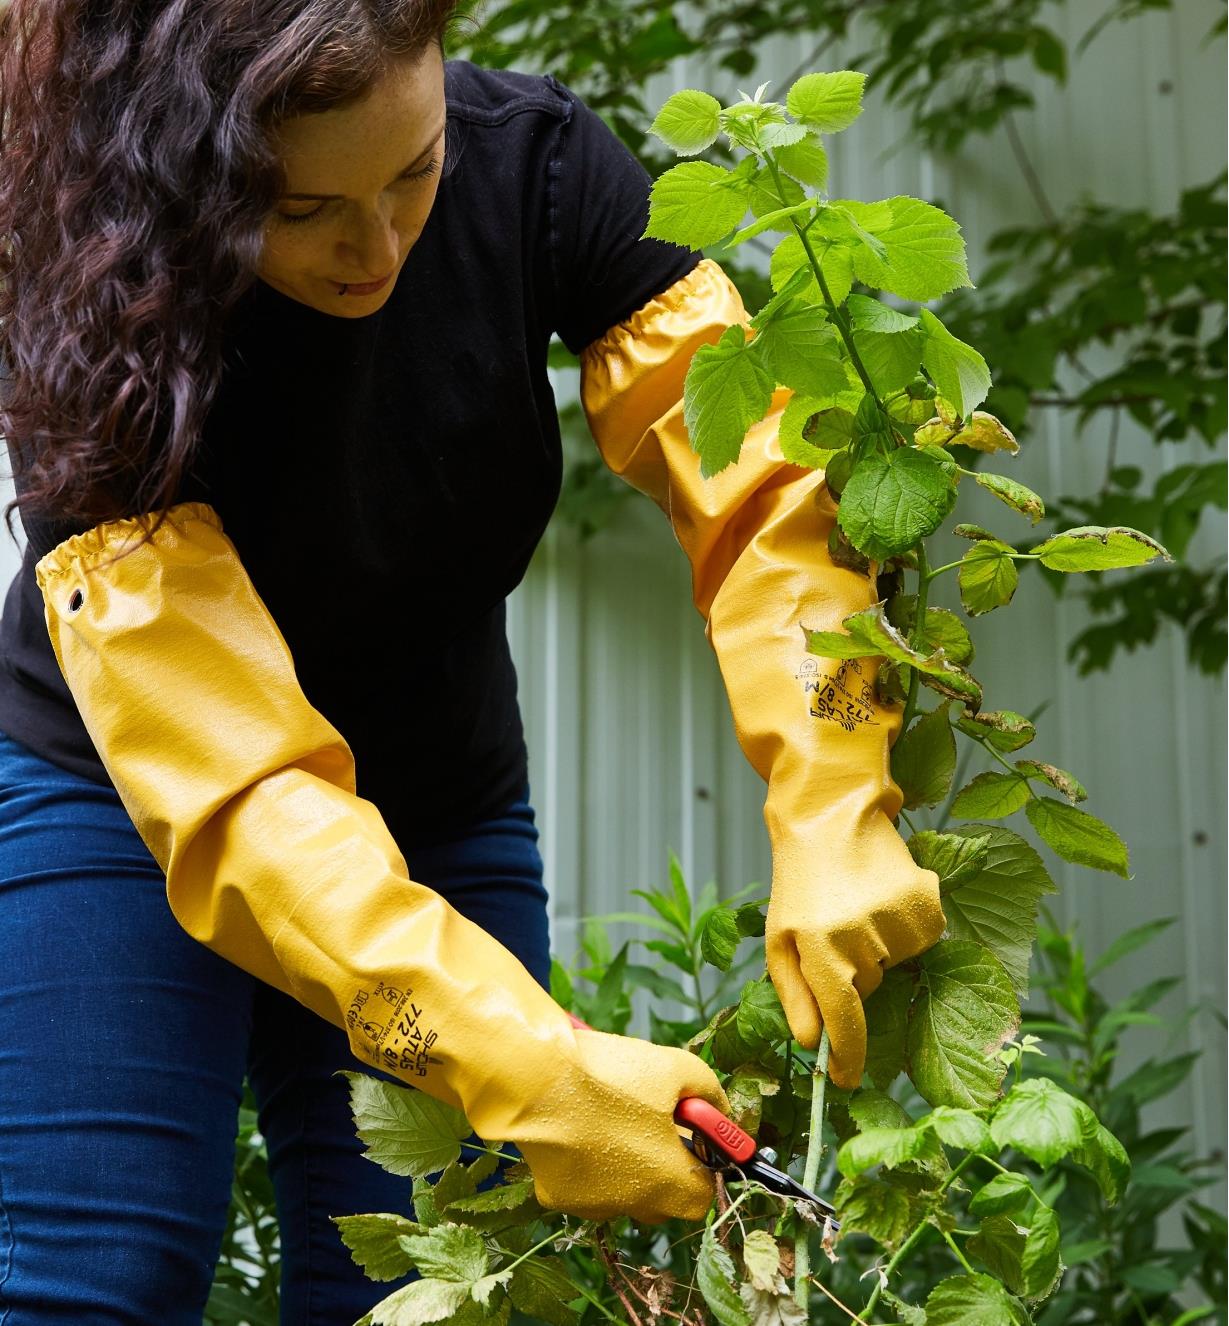 A woman wearing pruning gloves leans over to prune a rose bush